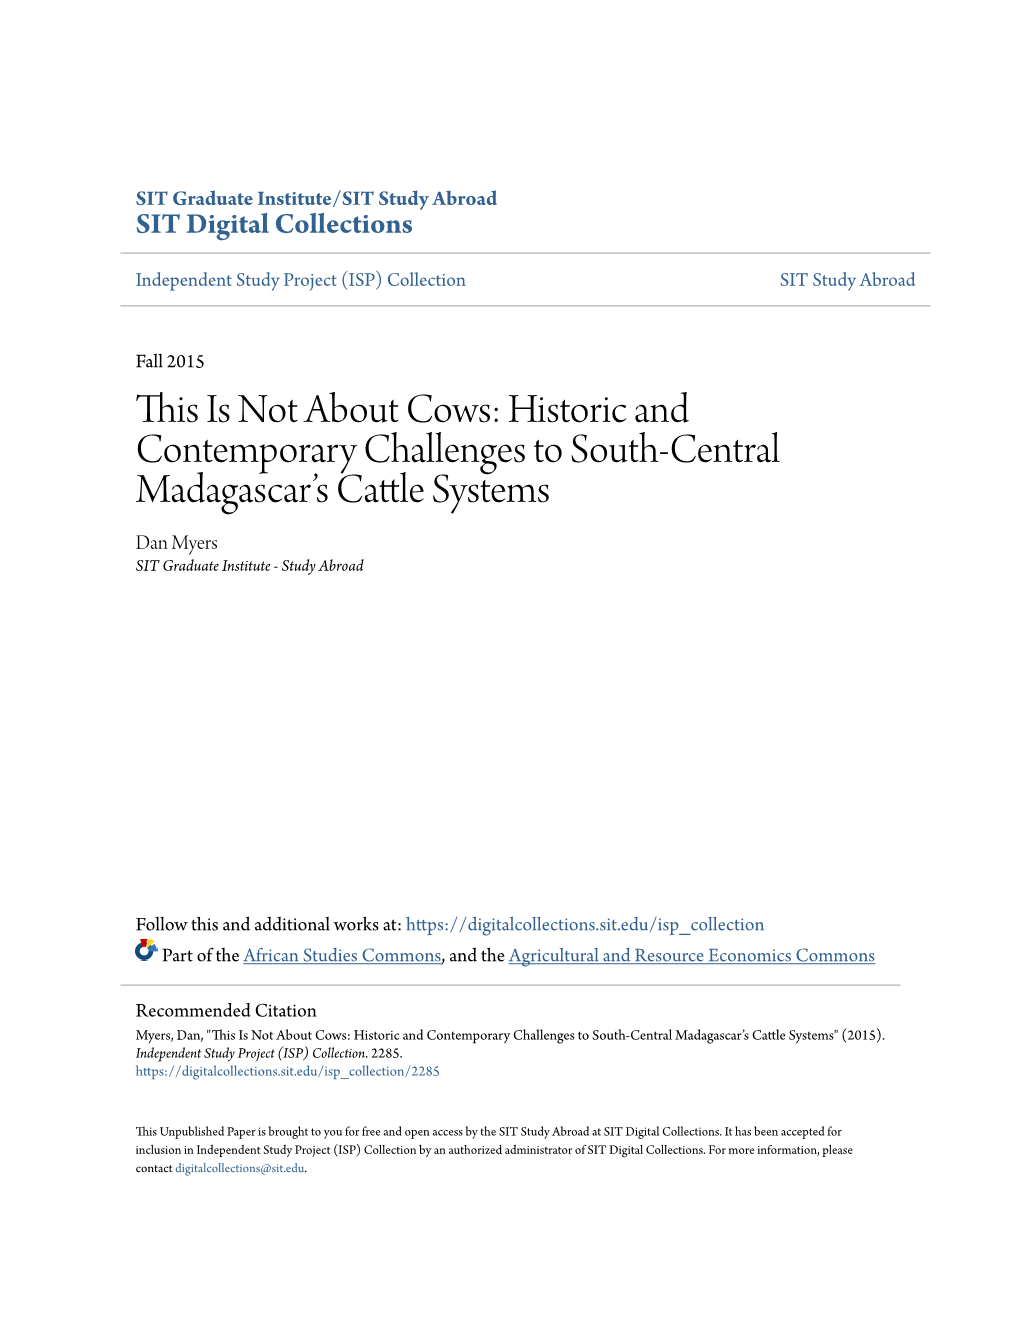 This Is Not About Cows: Historic and Contemporary Challenges to South-Central Madagascar’S Cattle Yss Tems Dan Myers SIT Graduate Institute - Study Abroad